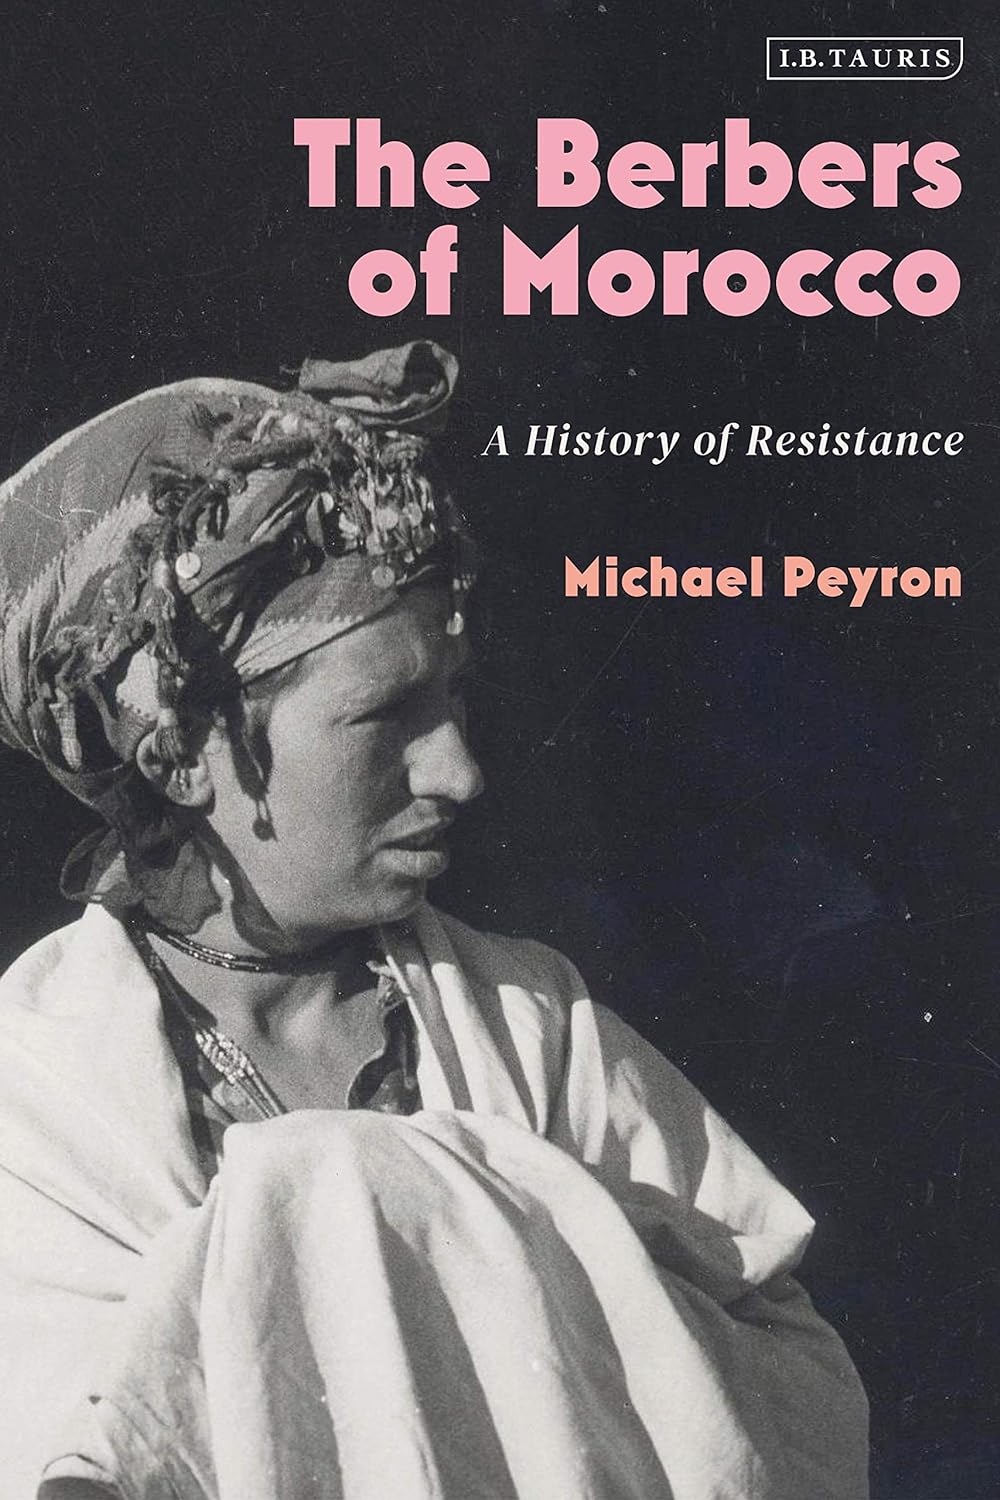 The Berbers of Morocco: A History of Resistance by Michael Peyron